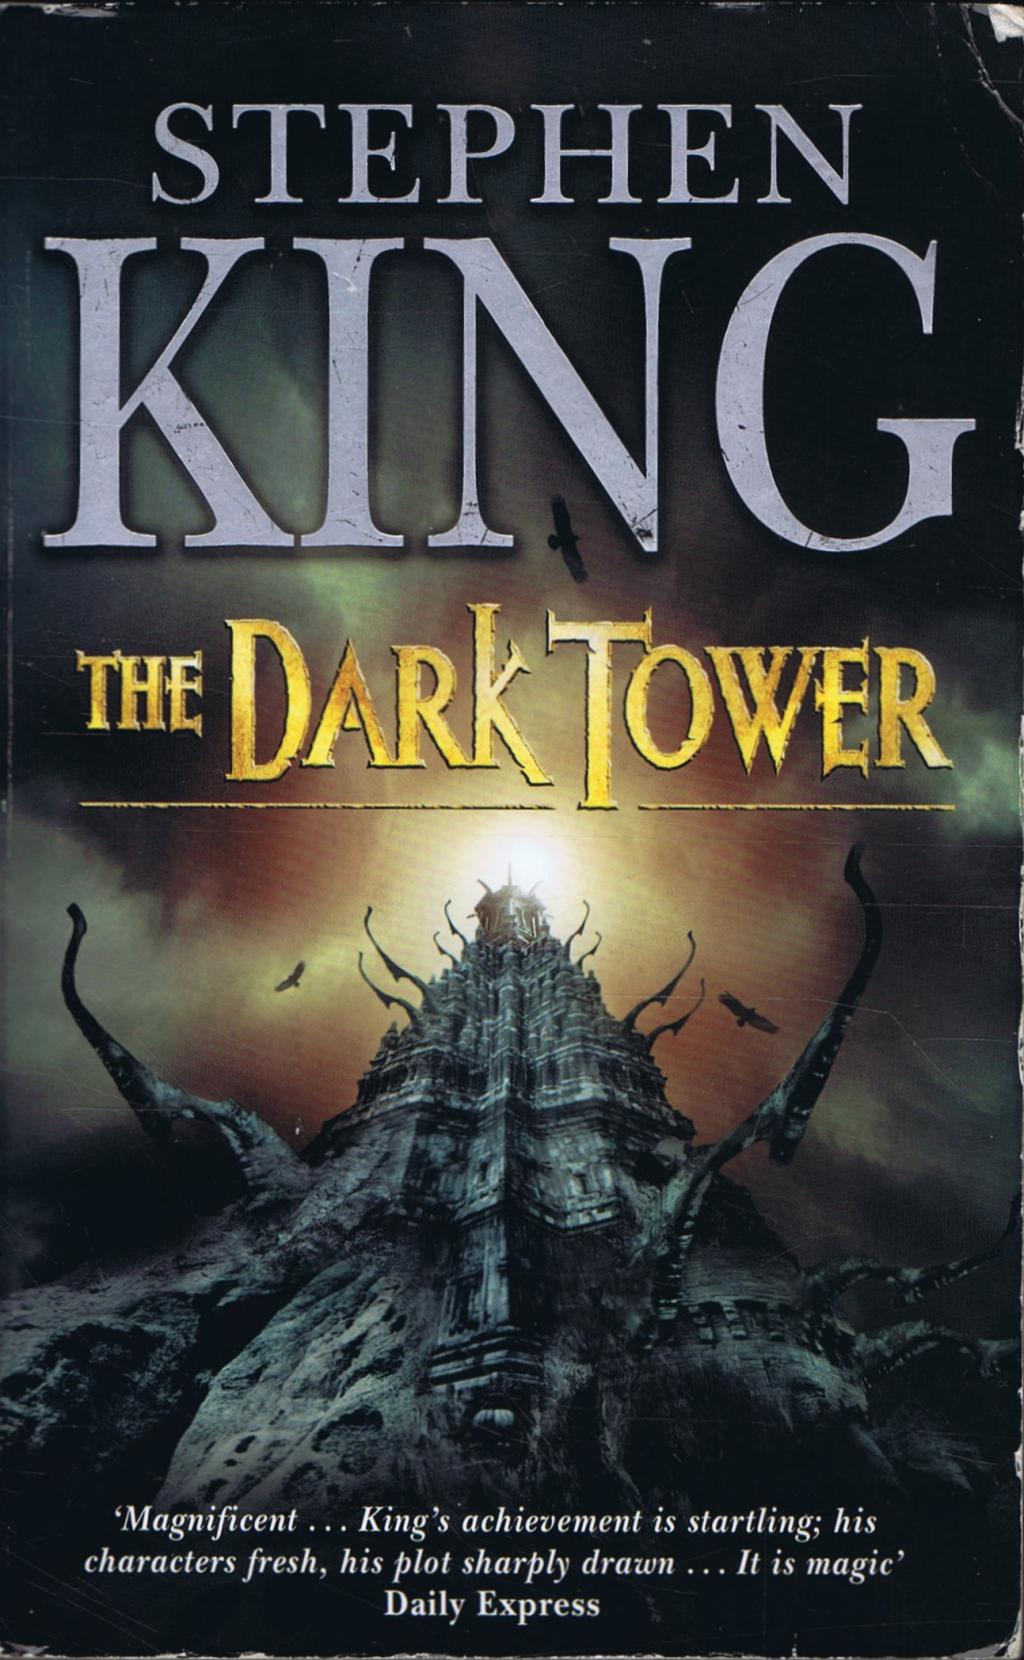 The Dark Tower download the new version for windows